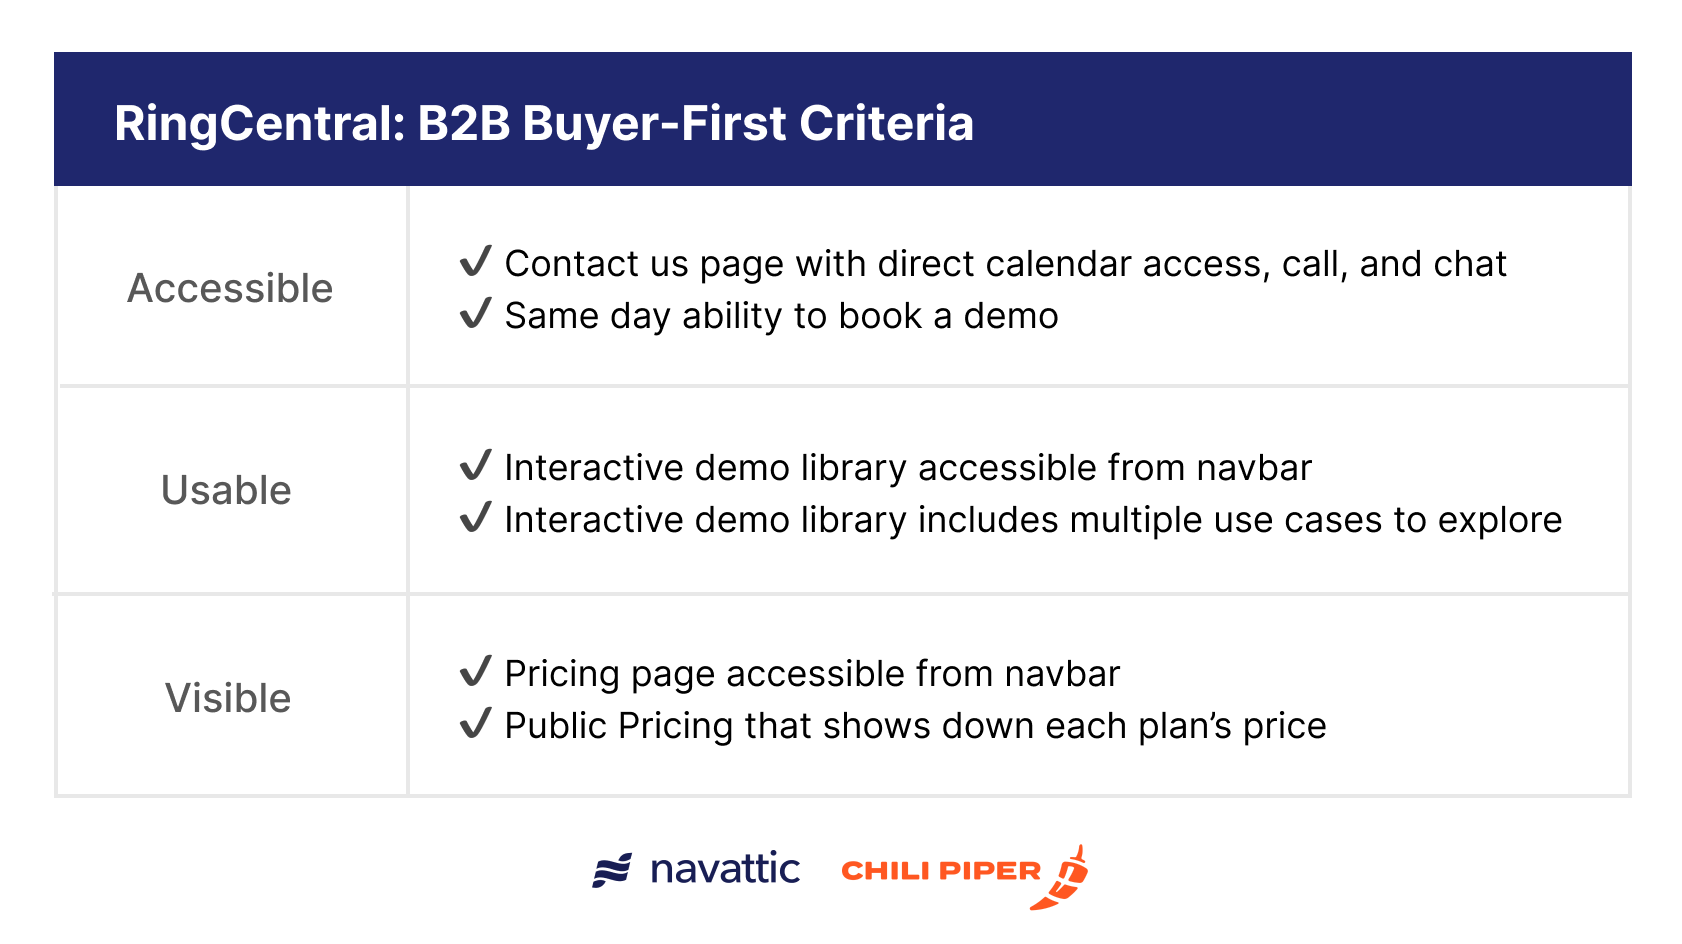 RingCentral Buyer First Criteria